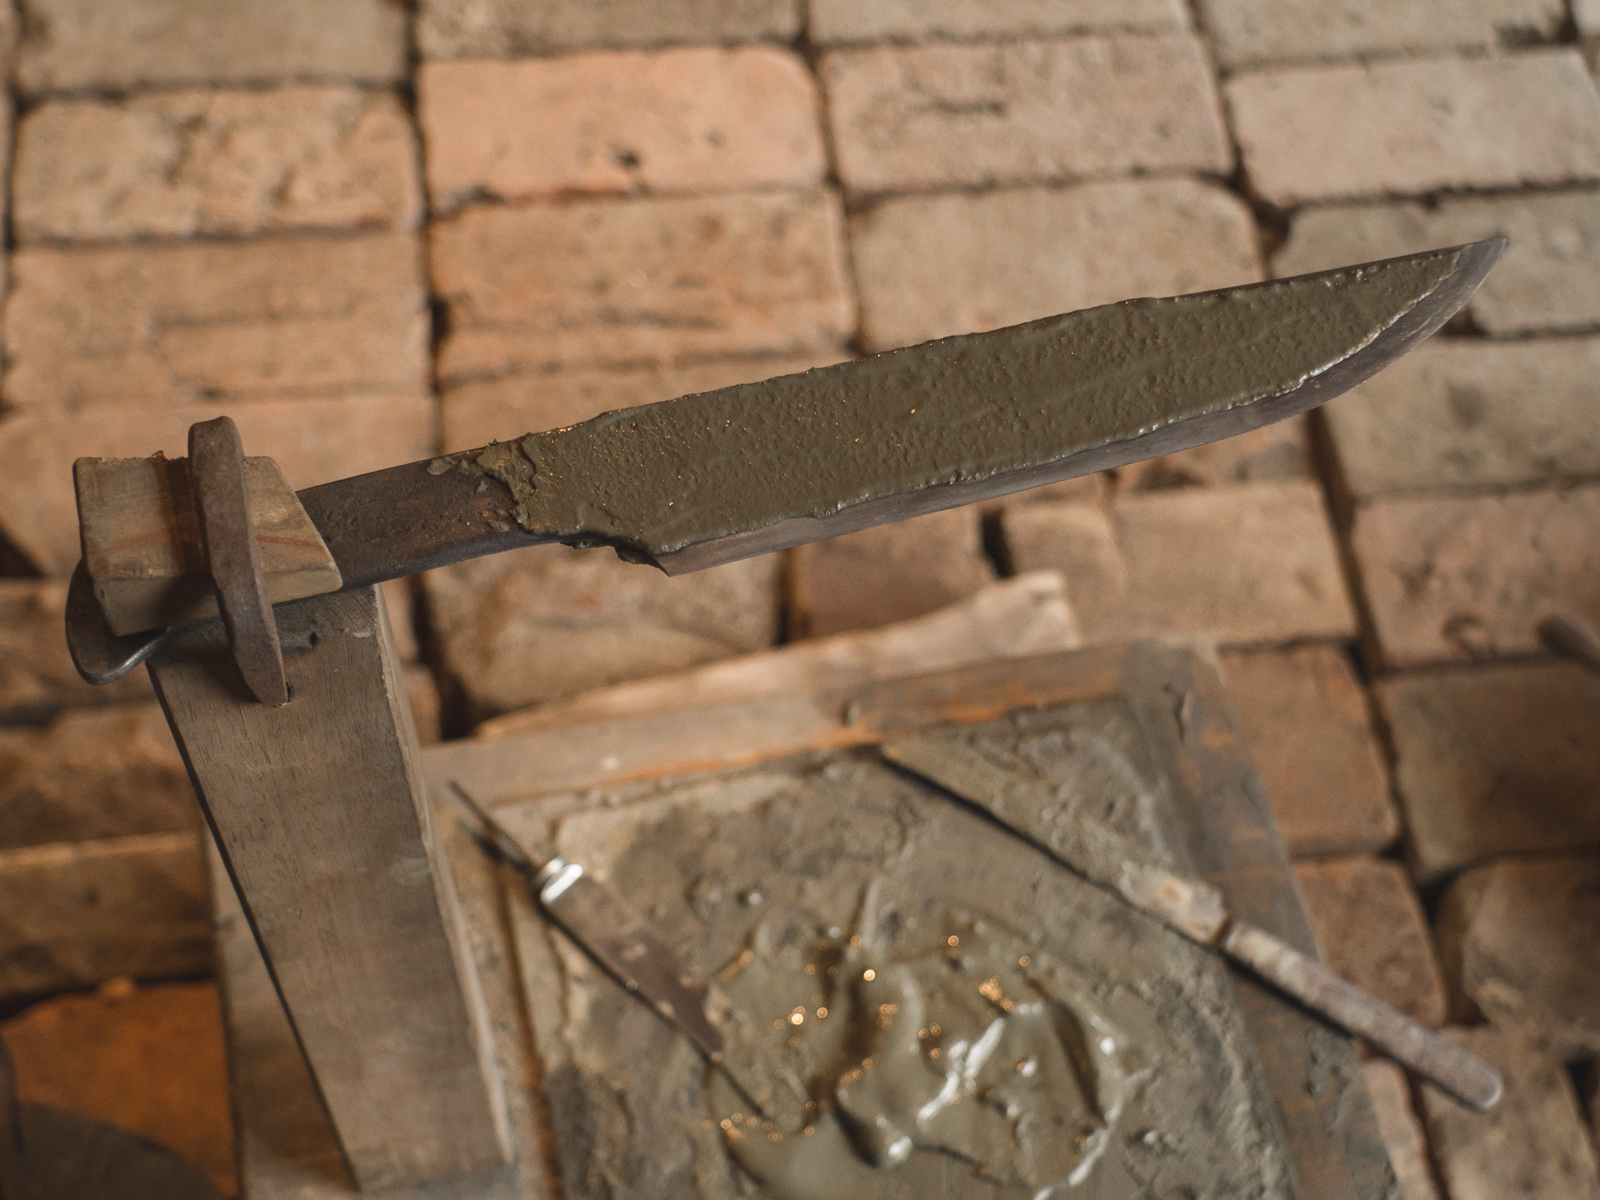 Island Blacksmith: Hand crafted camp bowie made from reclaimed steel using traditional techniques